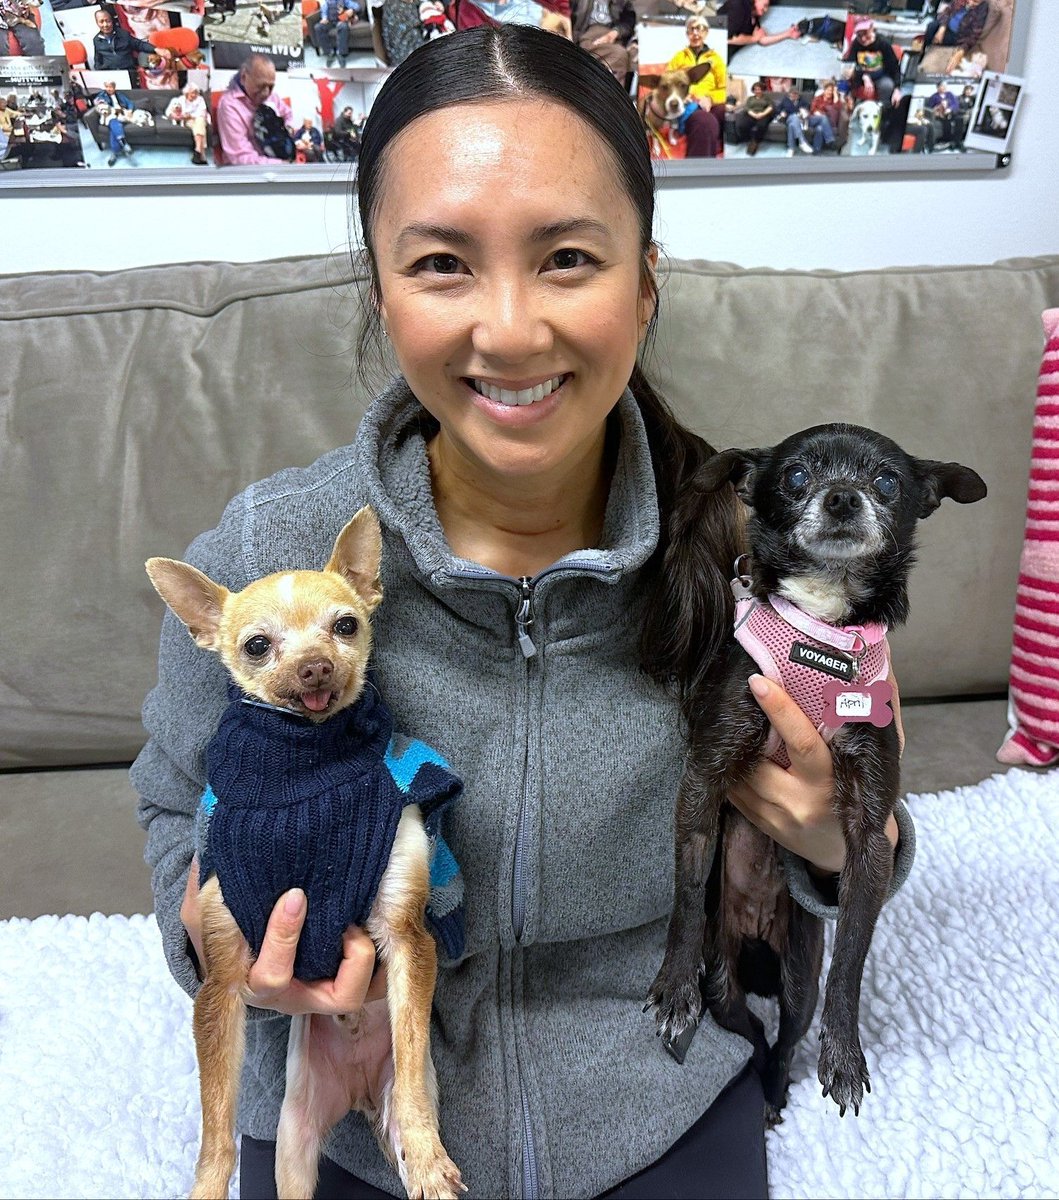 April (L) was #adopted by Kristine & Patrick and now April has a furry companion, Chico, who is also from Muttville! They simply fit perfectly in her embrace!